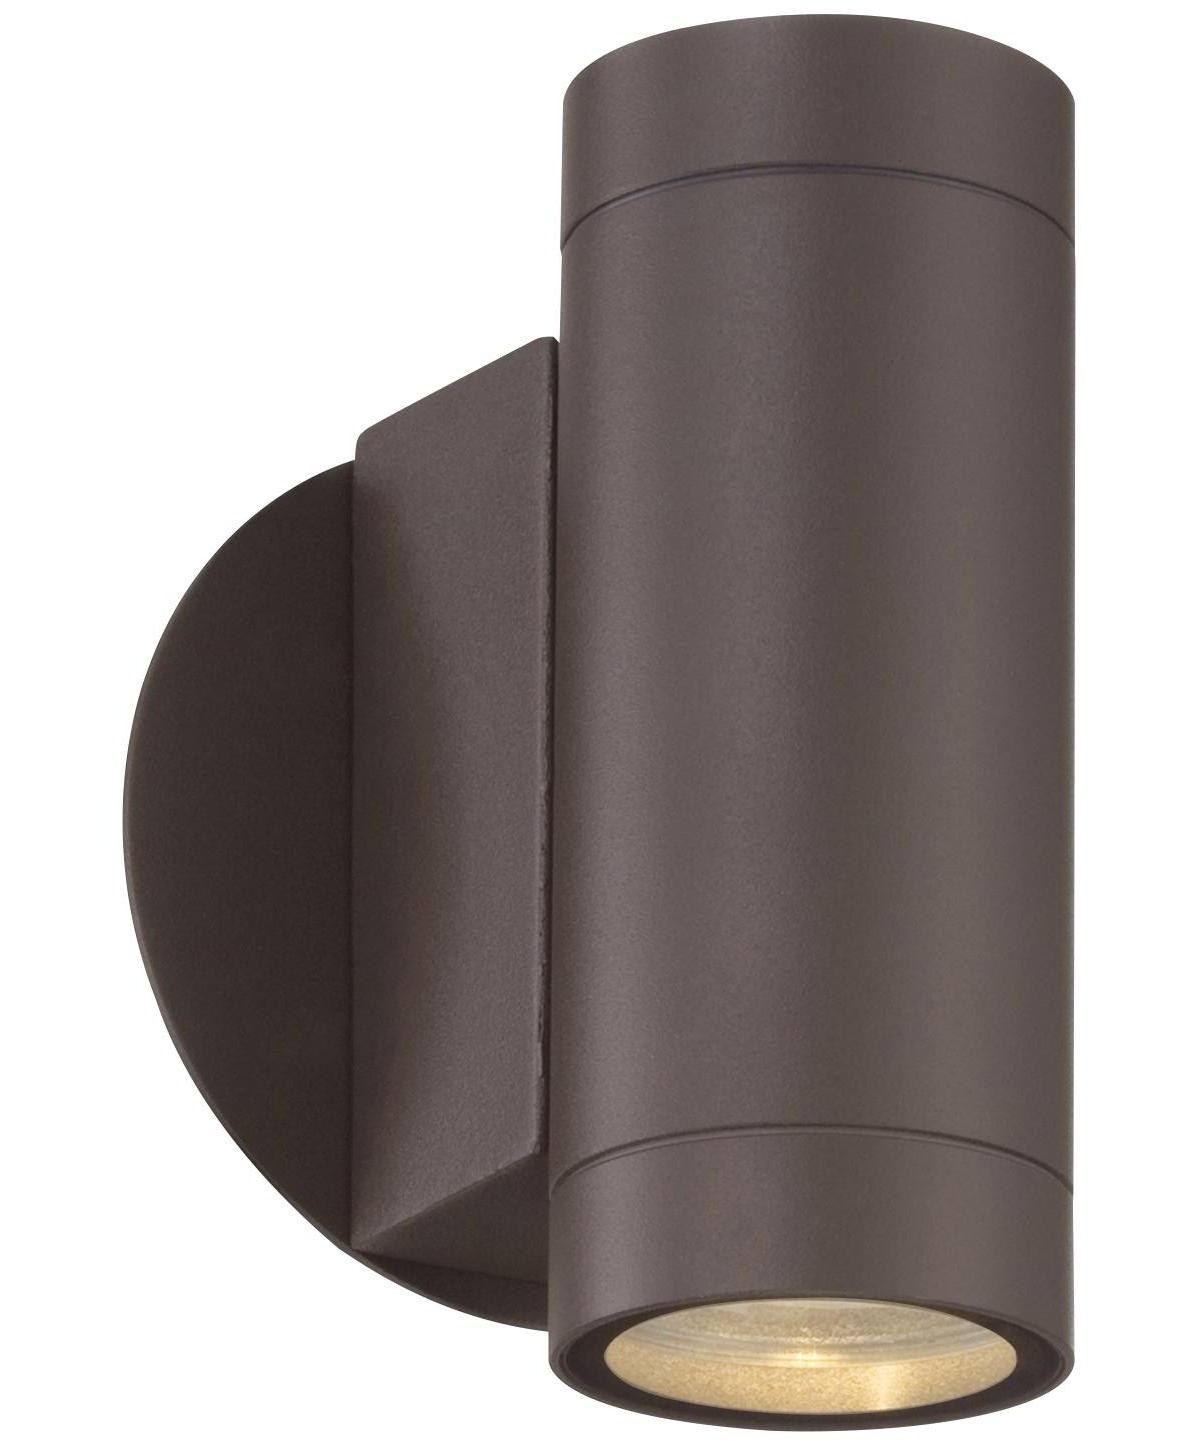 Modern Sconce Outdoor Wall Light Fixture Matte Bronze Cylinder 6 1/2" Tempered Glass Lens Up Down Decor for Exterior House Porch Patio Outside Deck Ga